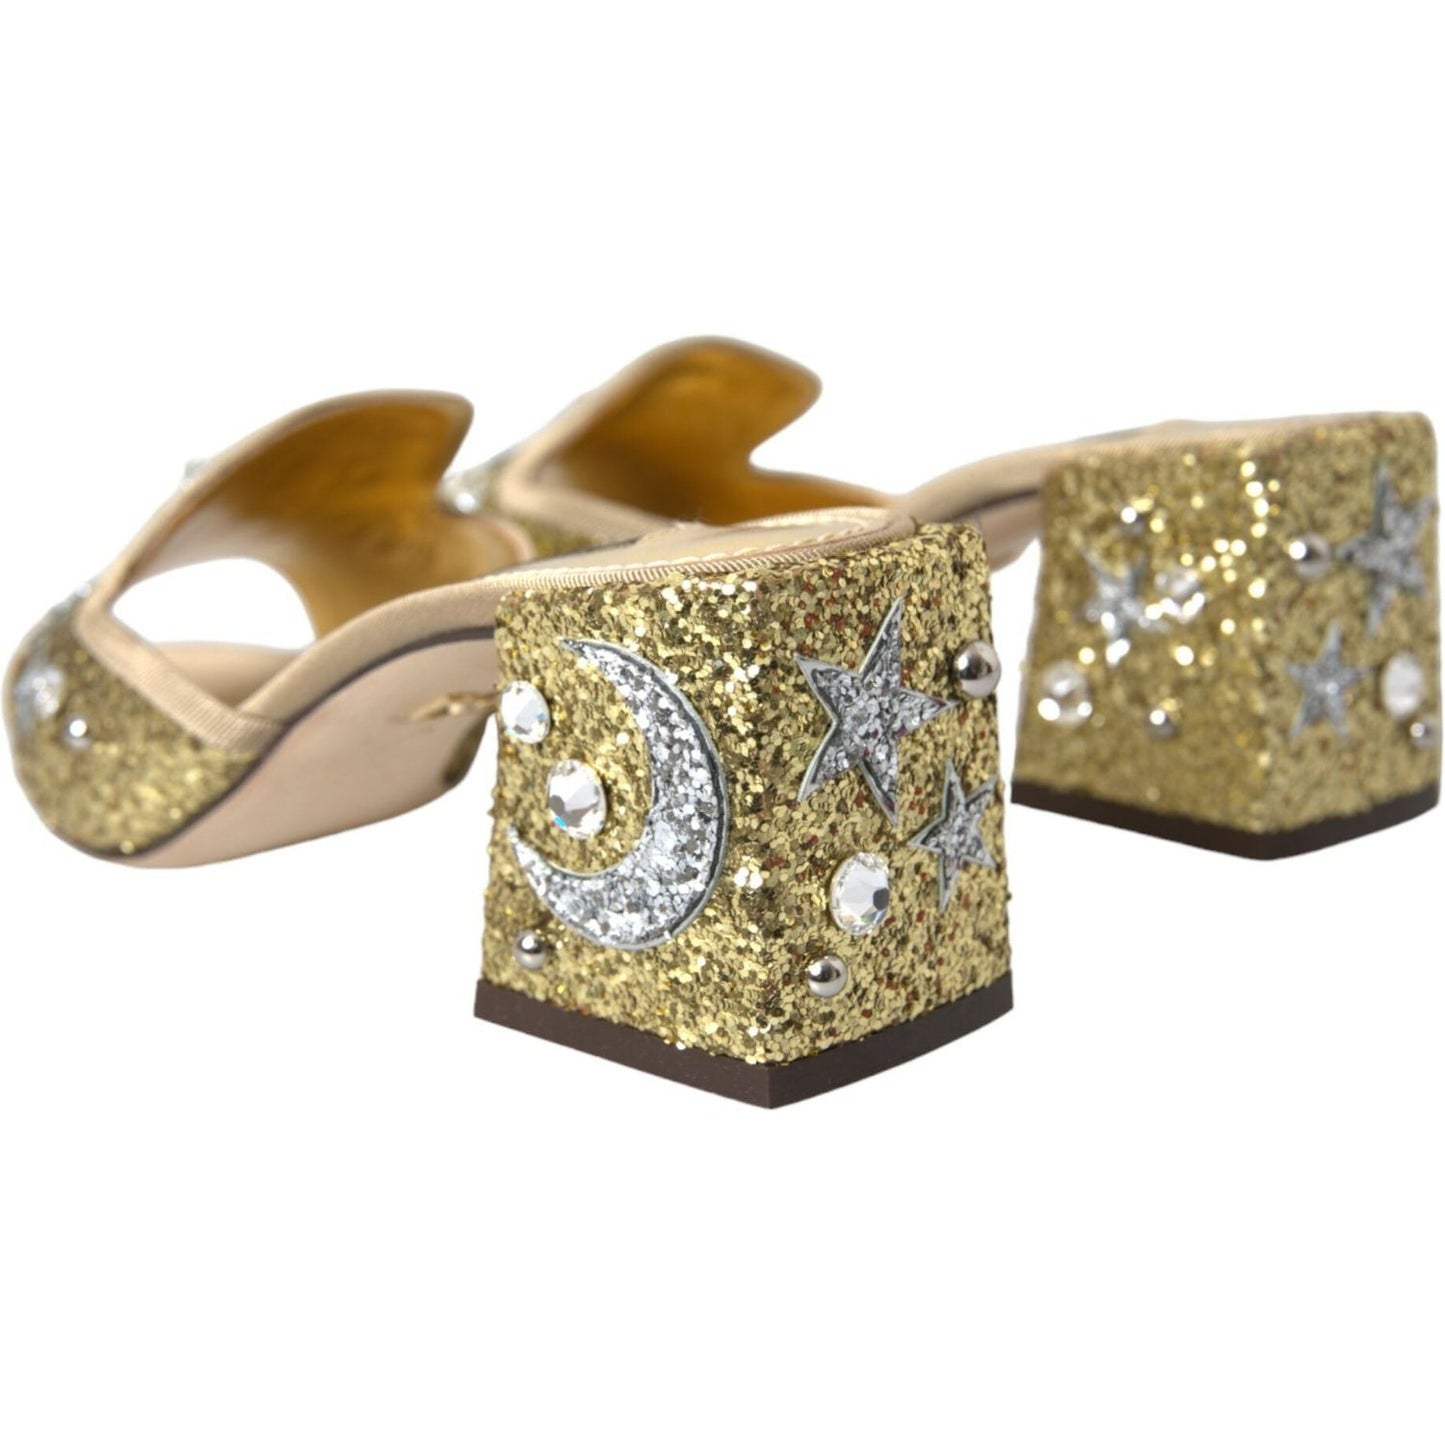 Dolce & Gabbana Gold Sequin Leather Heels Sandals Shoes gold-sequin-leather-heels-sandals-shoes